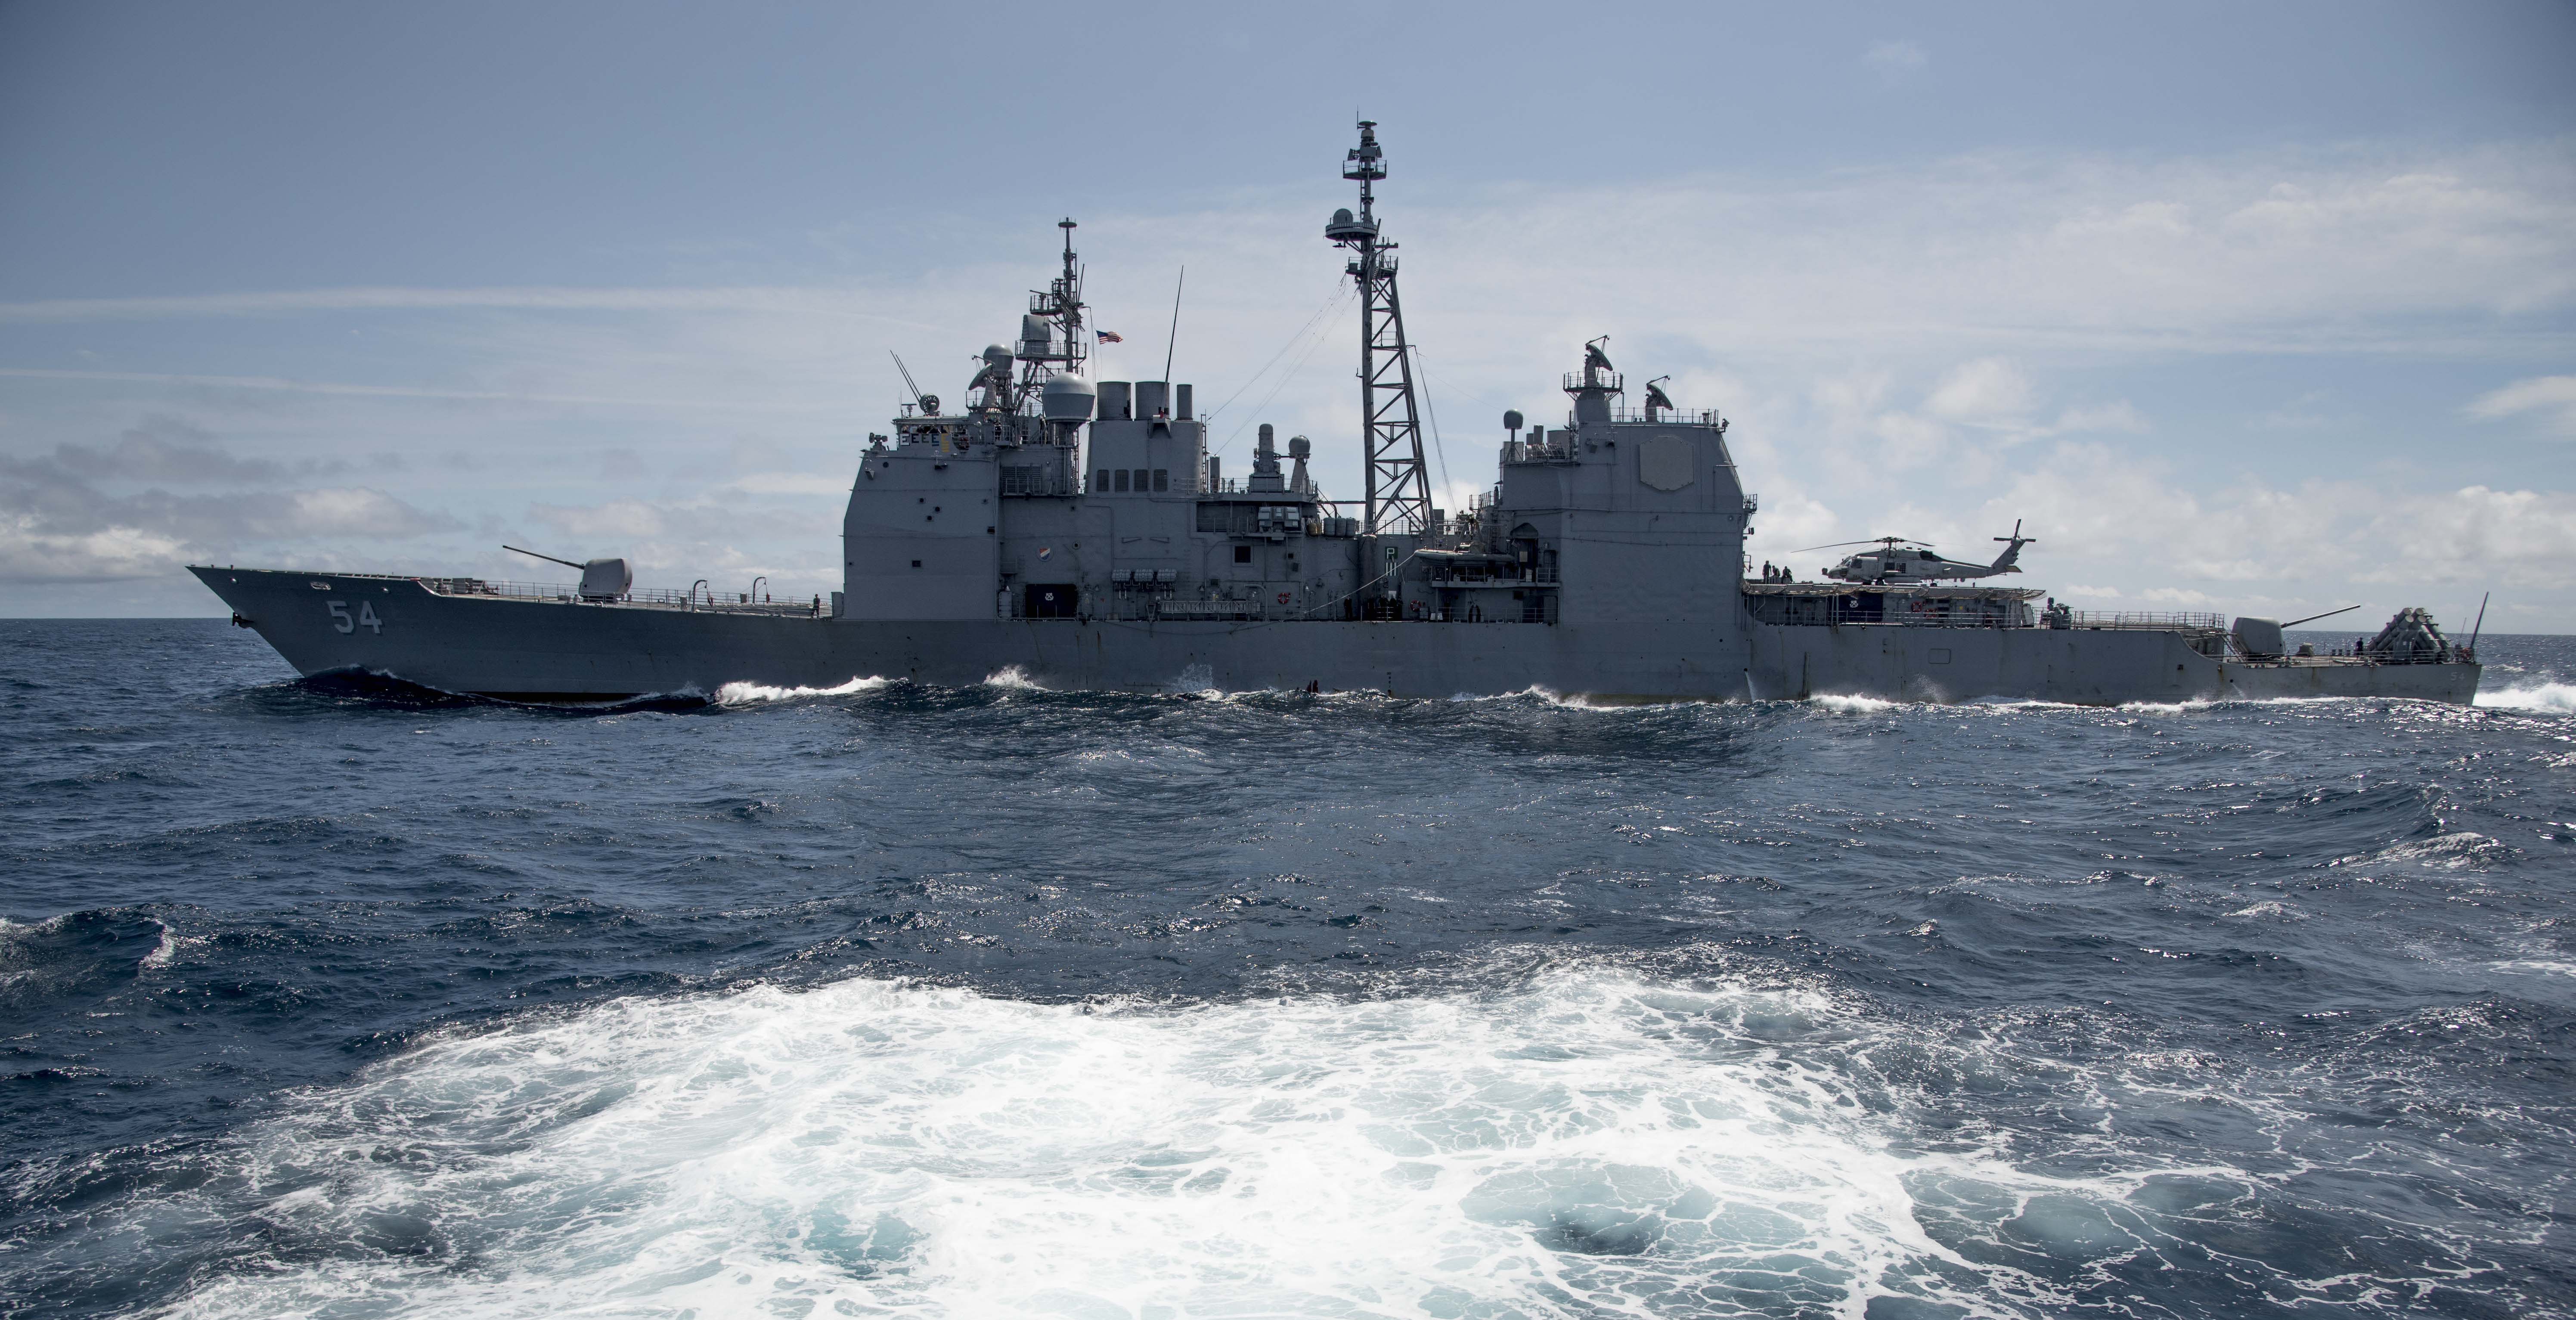 USS Antietam (CG-54) in the South China Sea on March 6, 2016. US Navy Photo